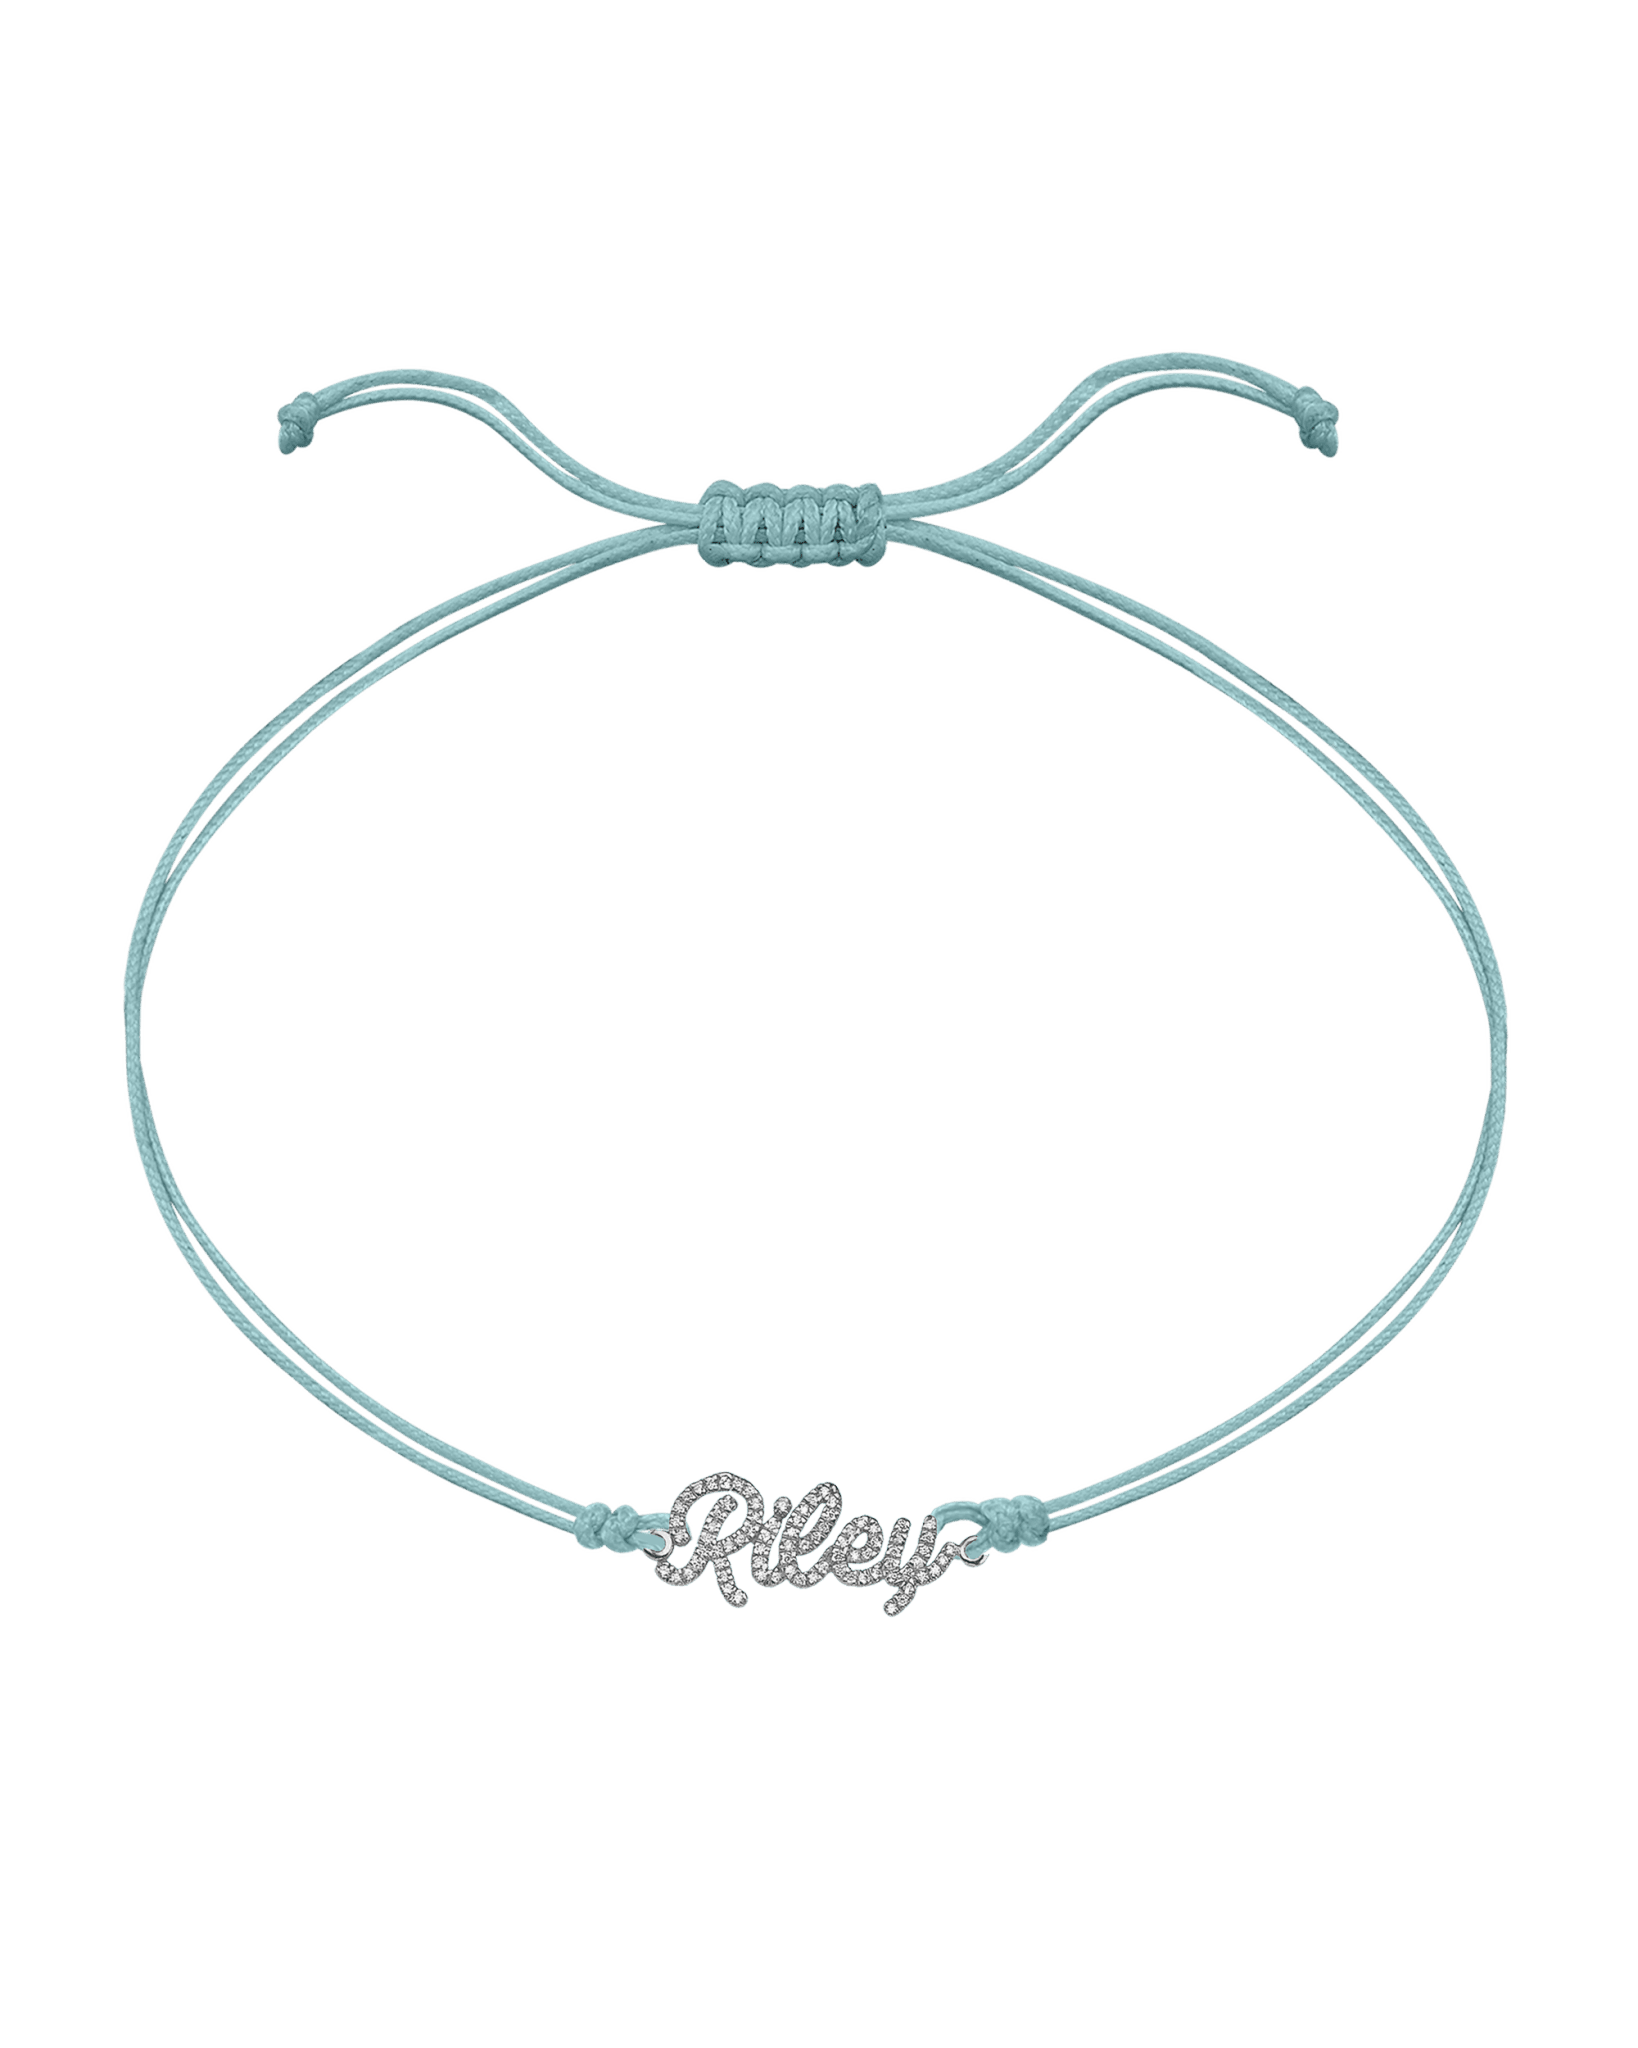 Paved Name Plate String of Love - 14K White Gold Bracelet 14K Solid Gold Turquoise 1 